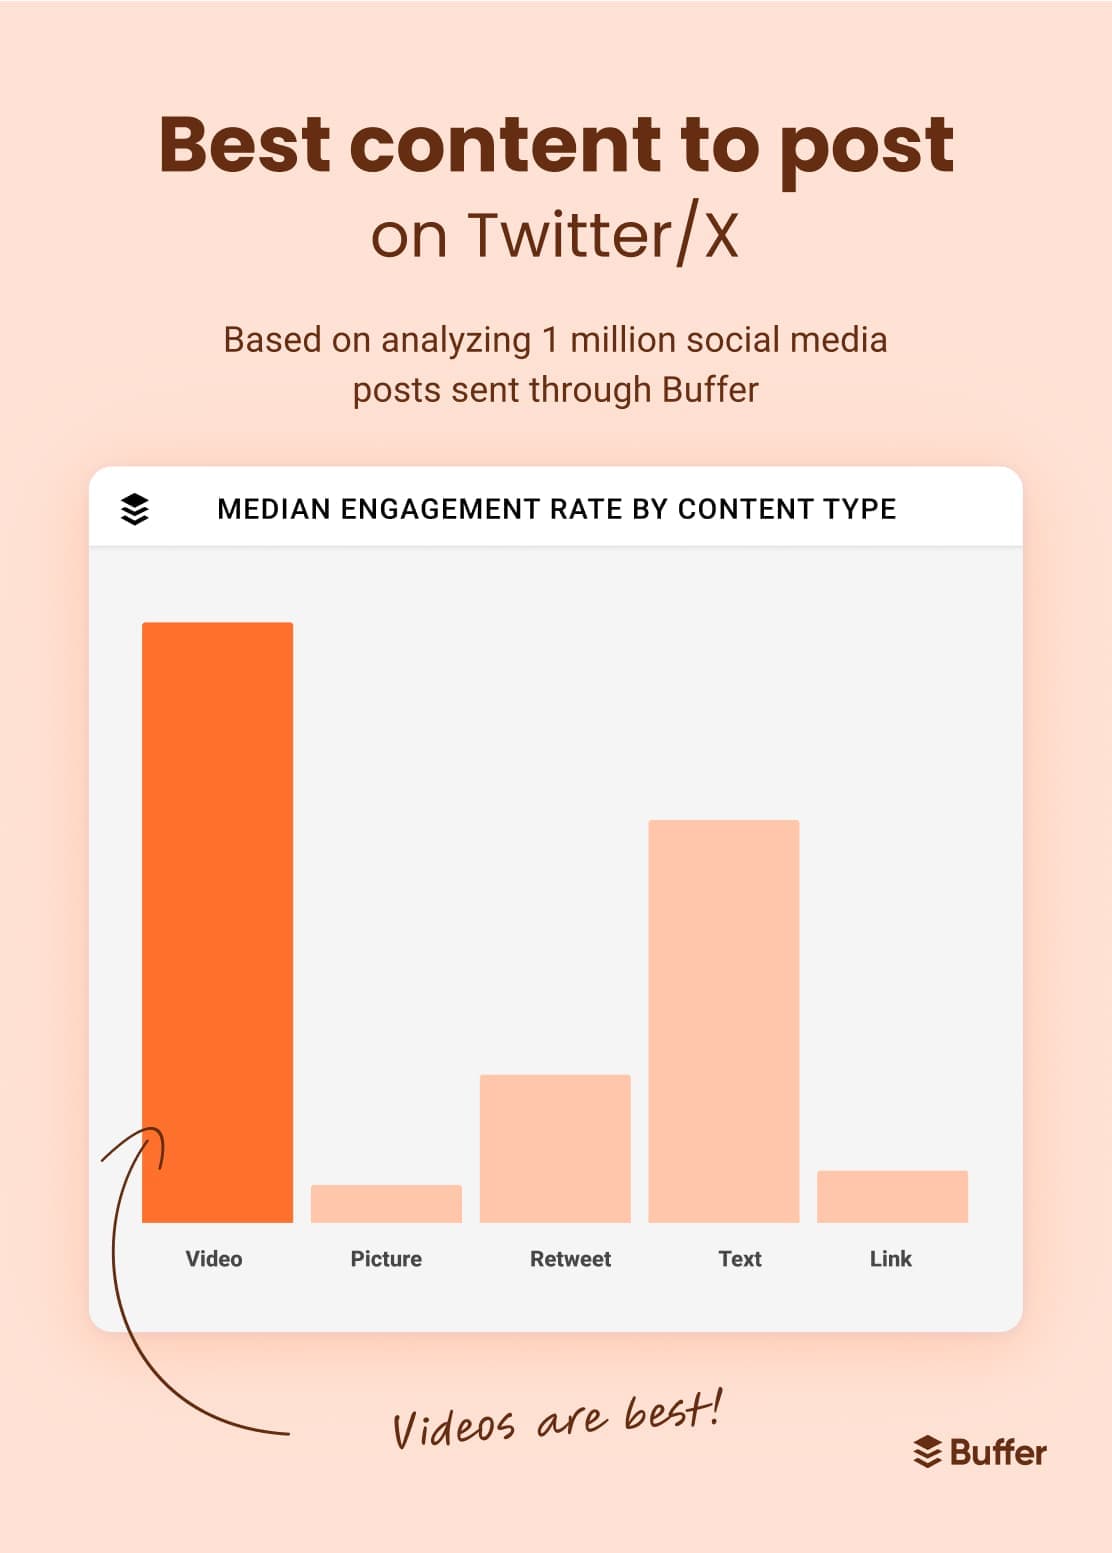 Bar chart comparing median engagement rate by content type displays video as the best content to post on X/Twitter based on analyzing 1 million social media posts sent through Buffer. Video is followed by text, retweet, link, and picture content types.